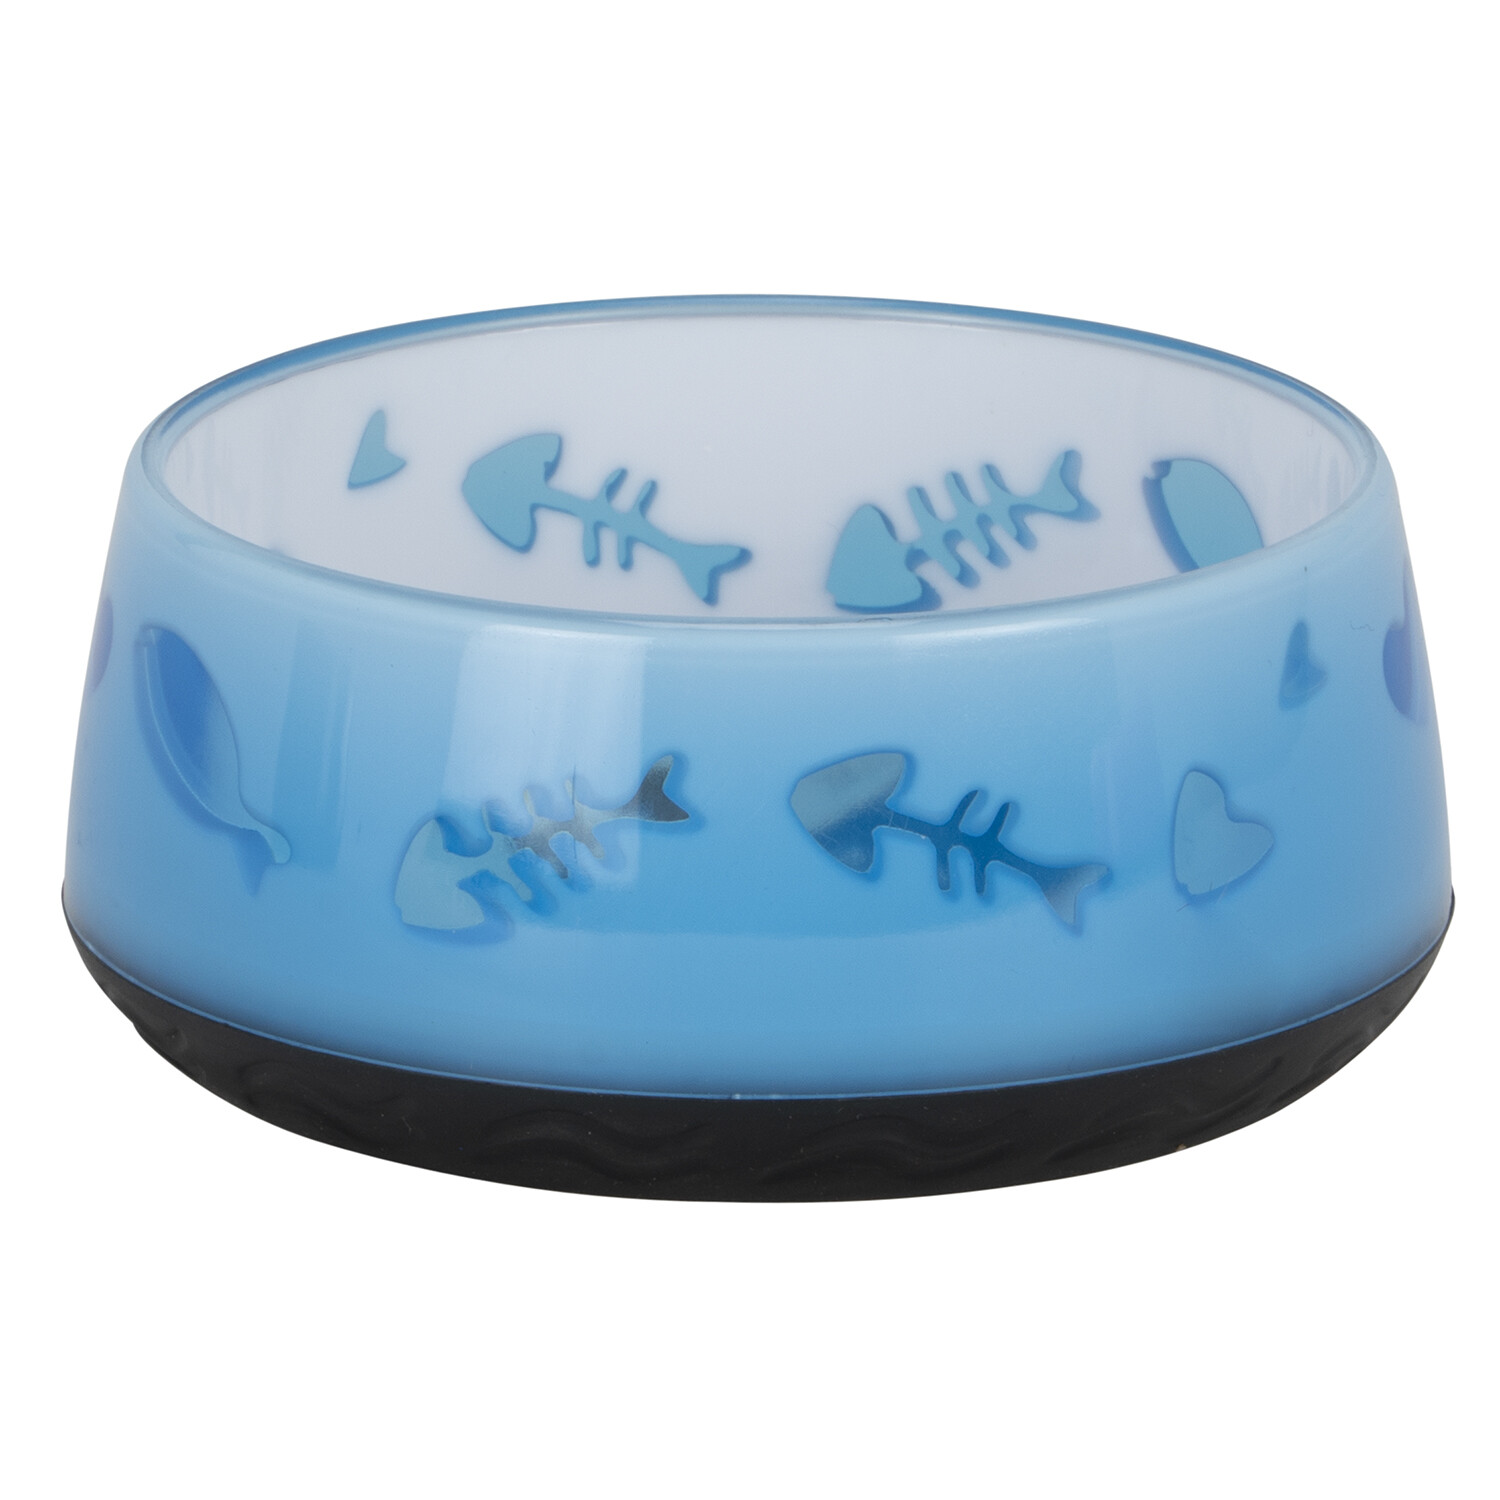 Clever Paws Neon Pet Bowl - Small Image 1